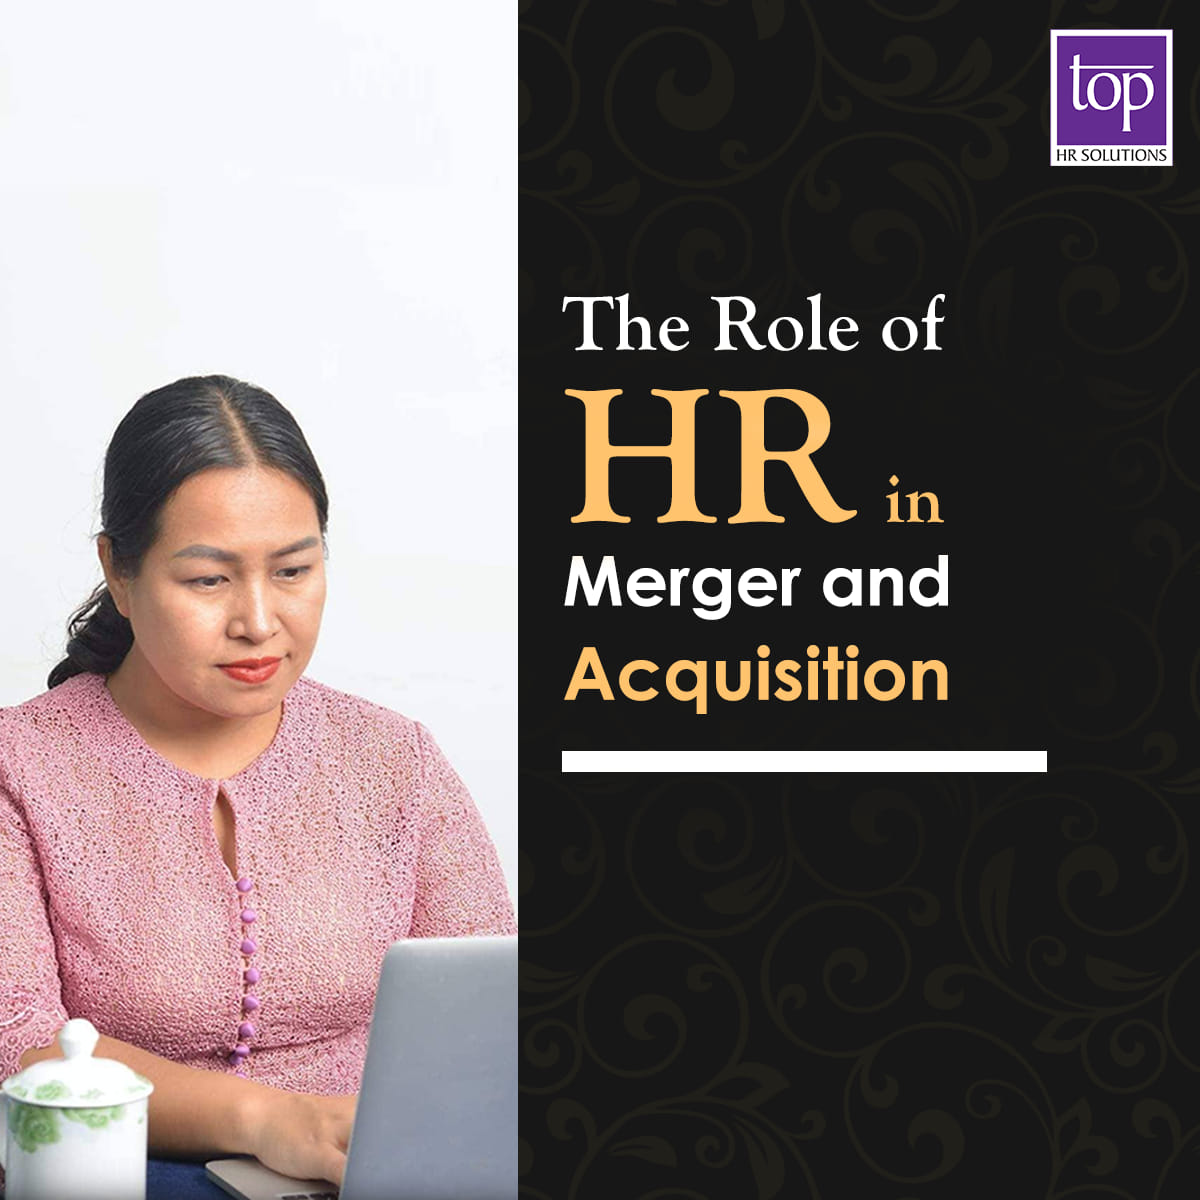 The Role of HR in Merger and Acquisition